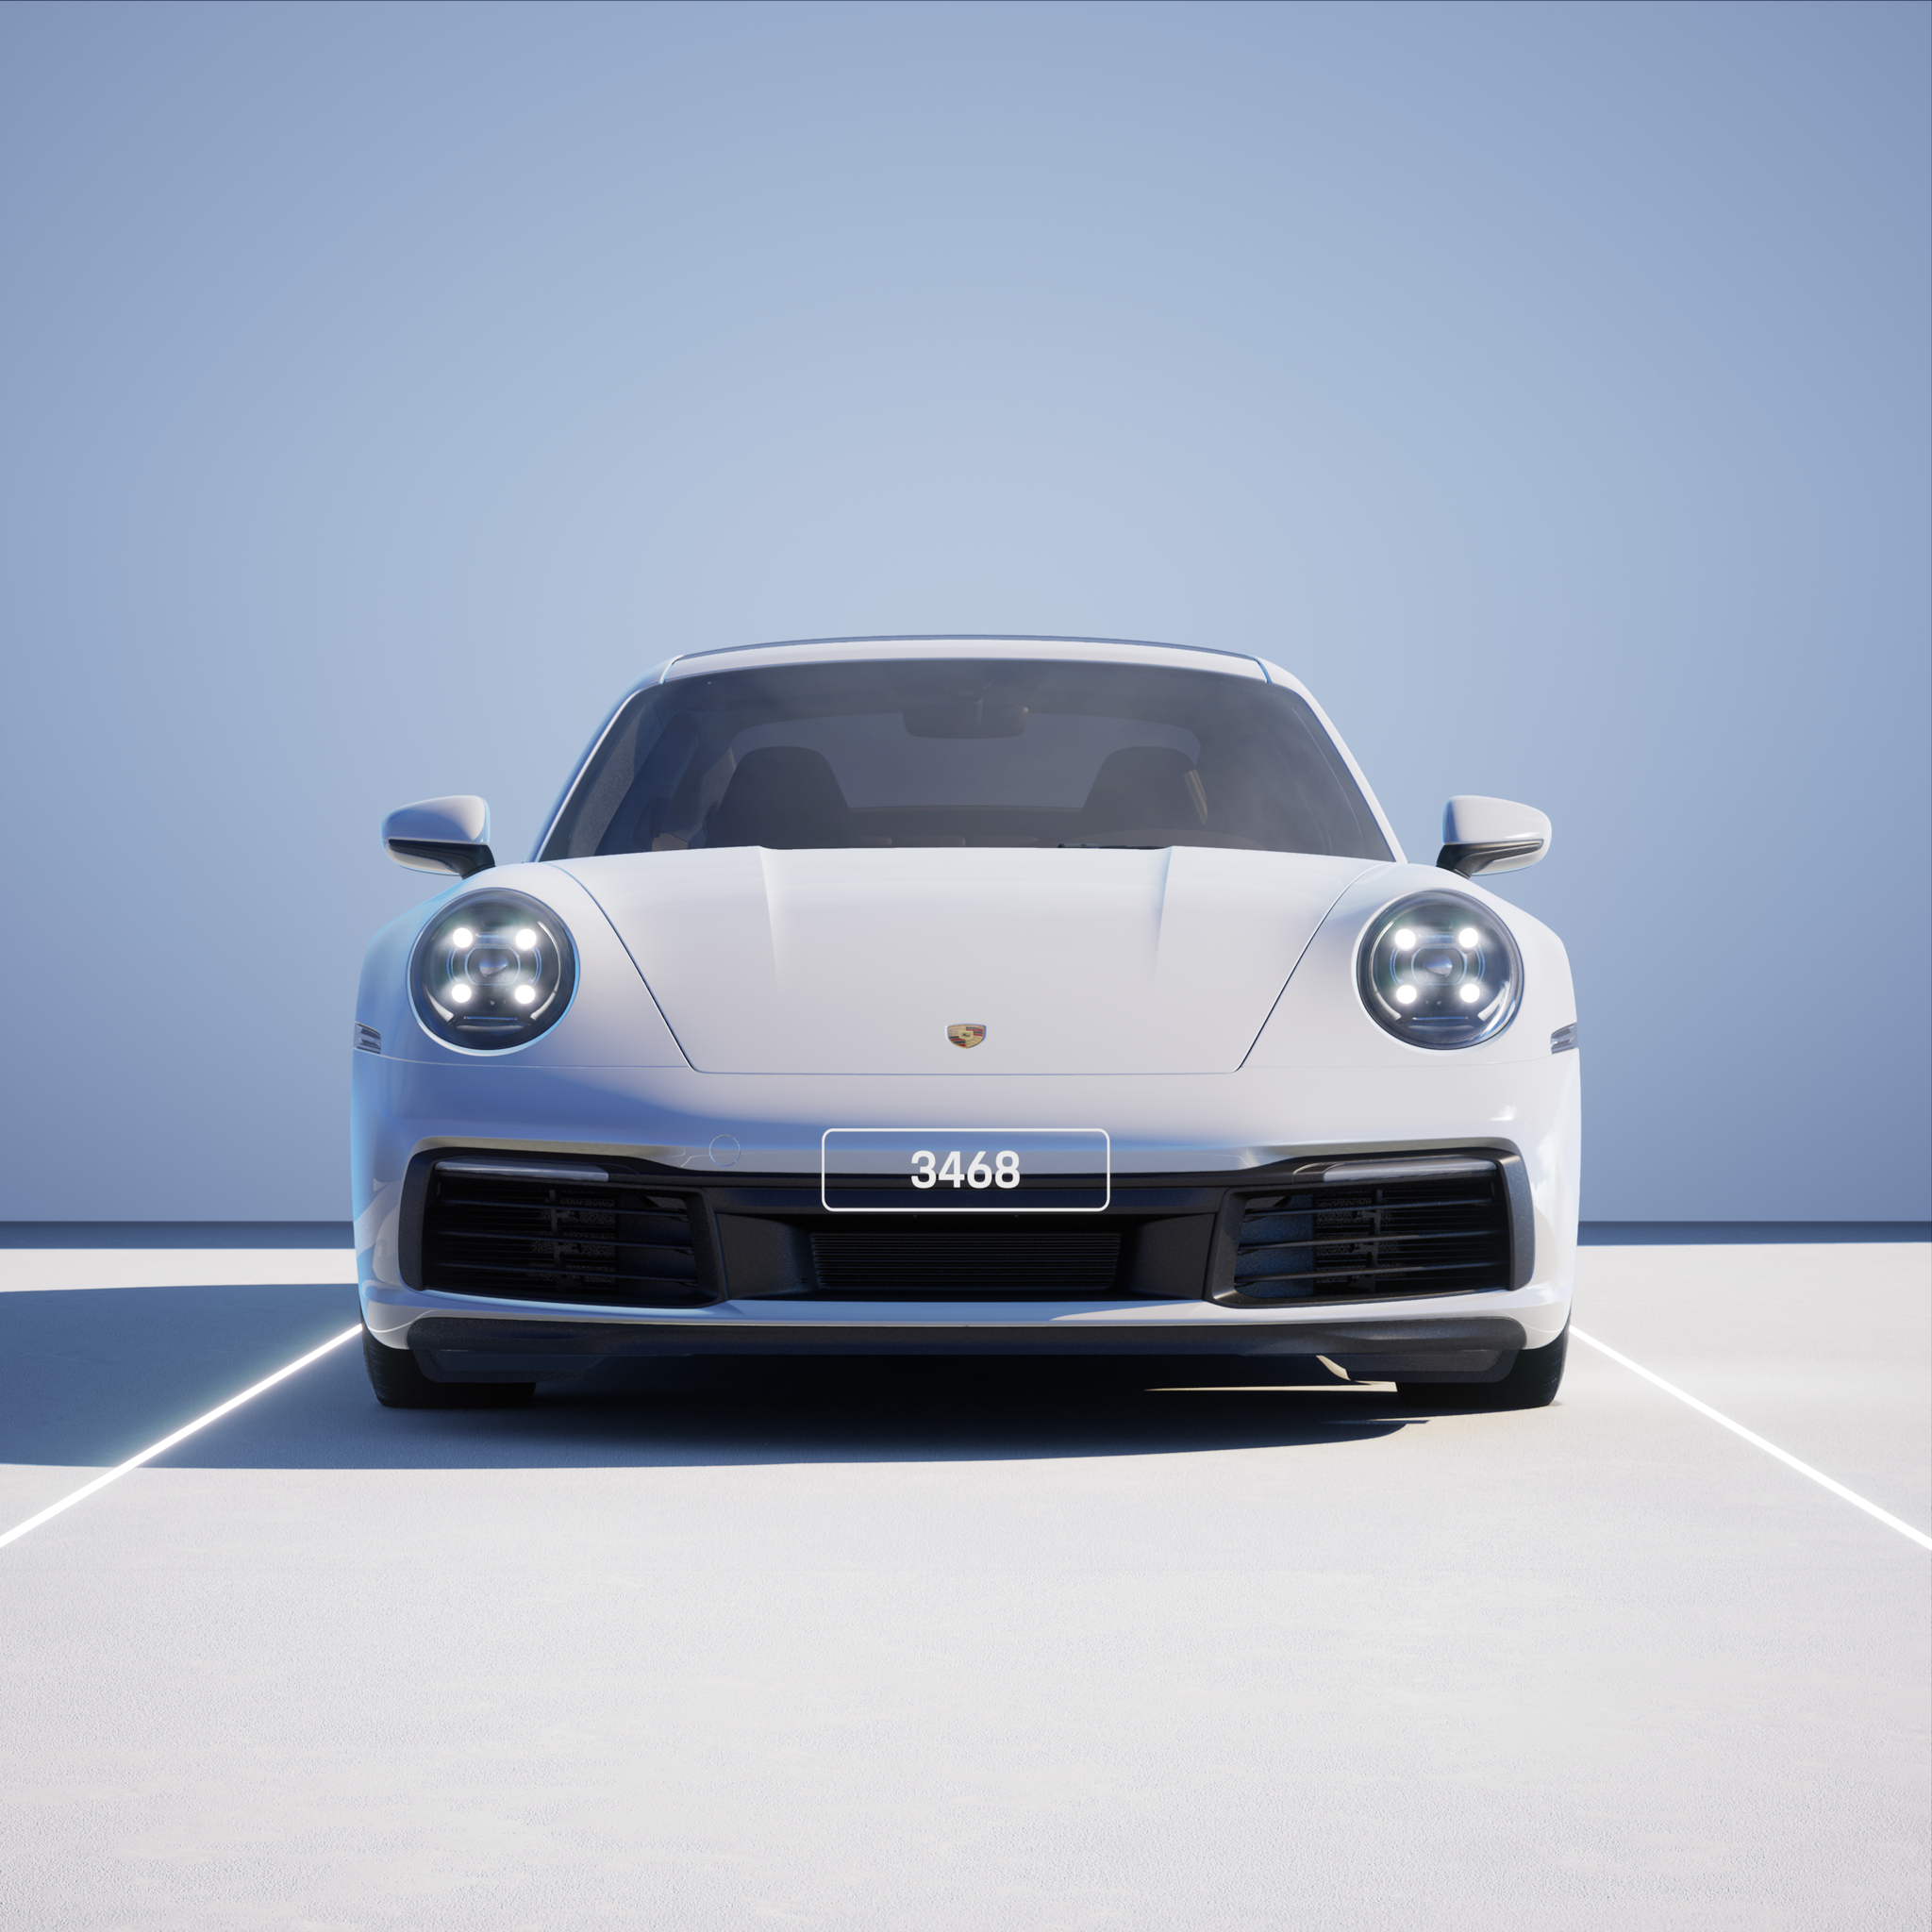 The PORSCHΞ 911 3468 image in phase